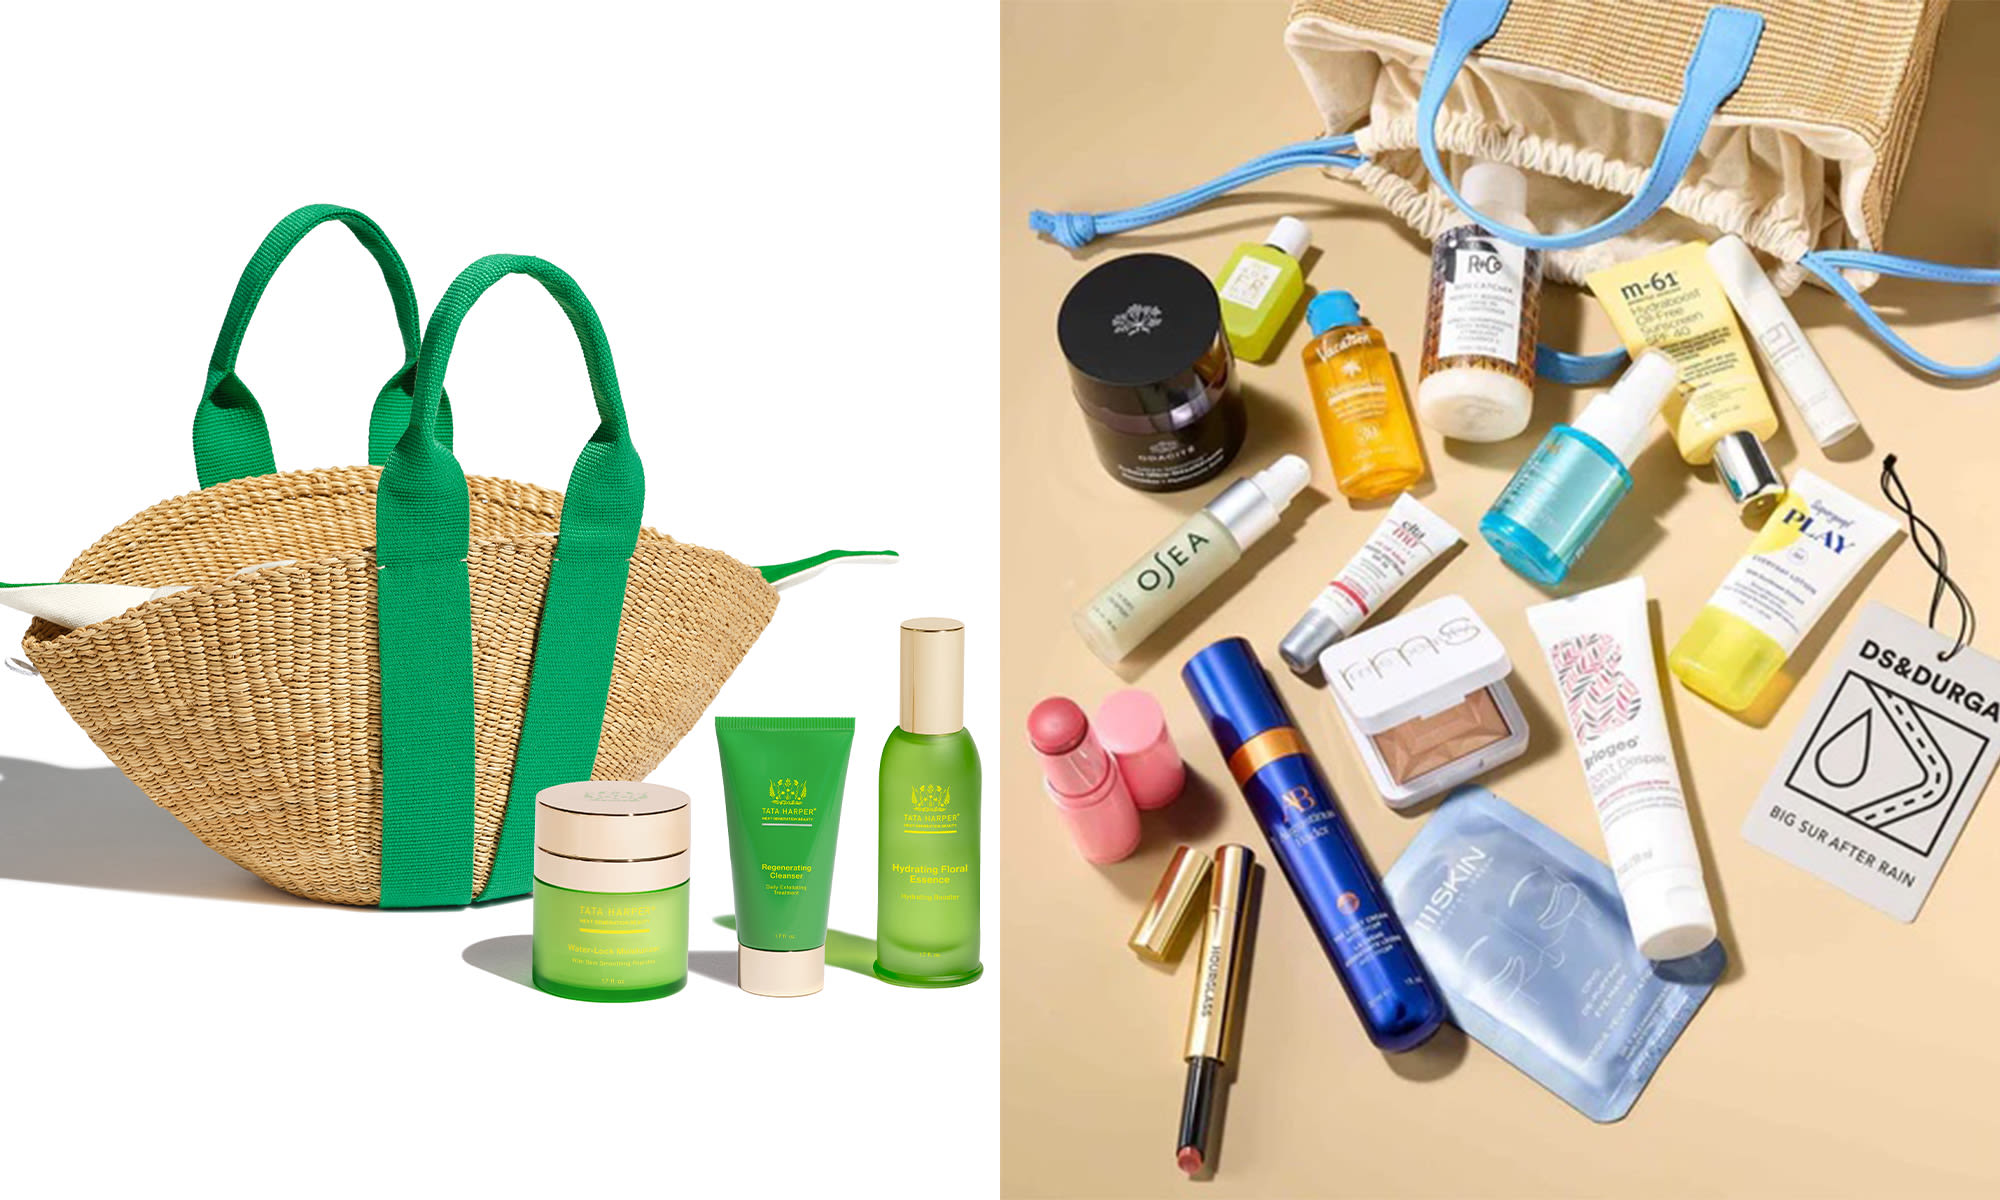 The 10 Best Summer Beauty Kits That Come in Chic Mini Gift Bags